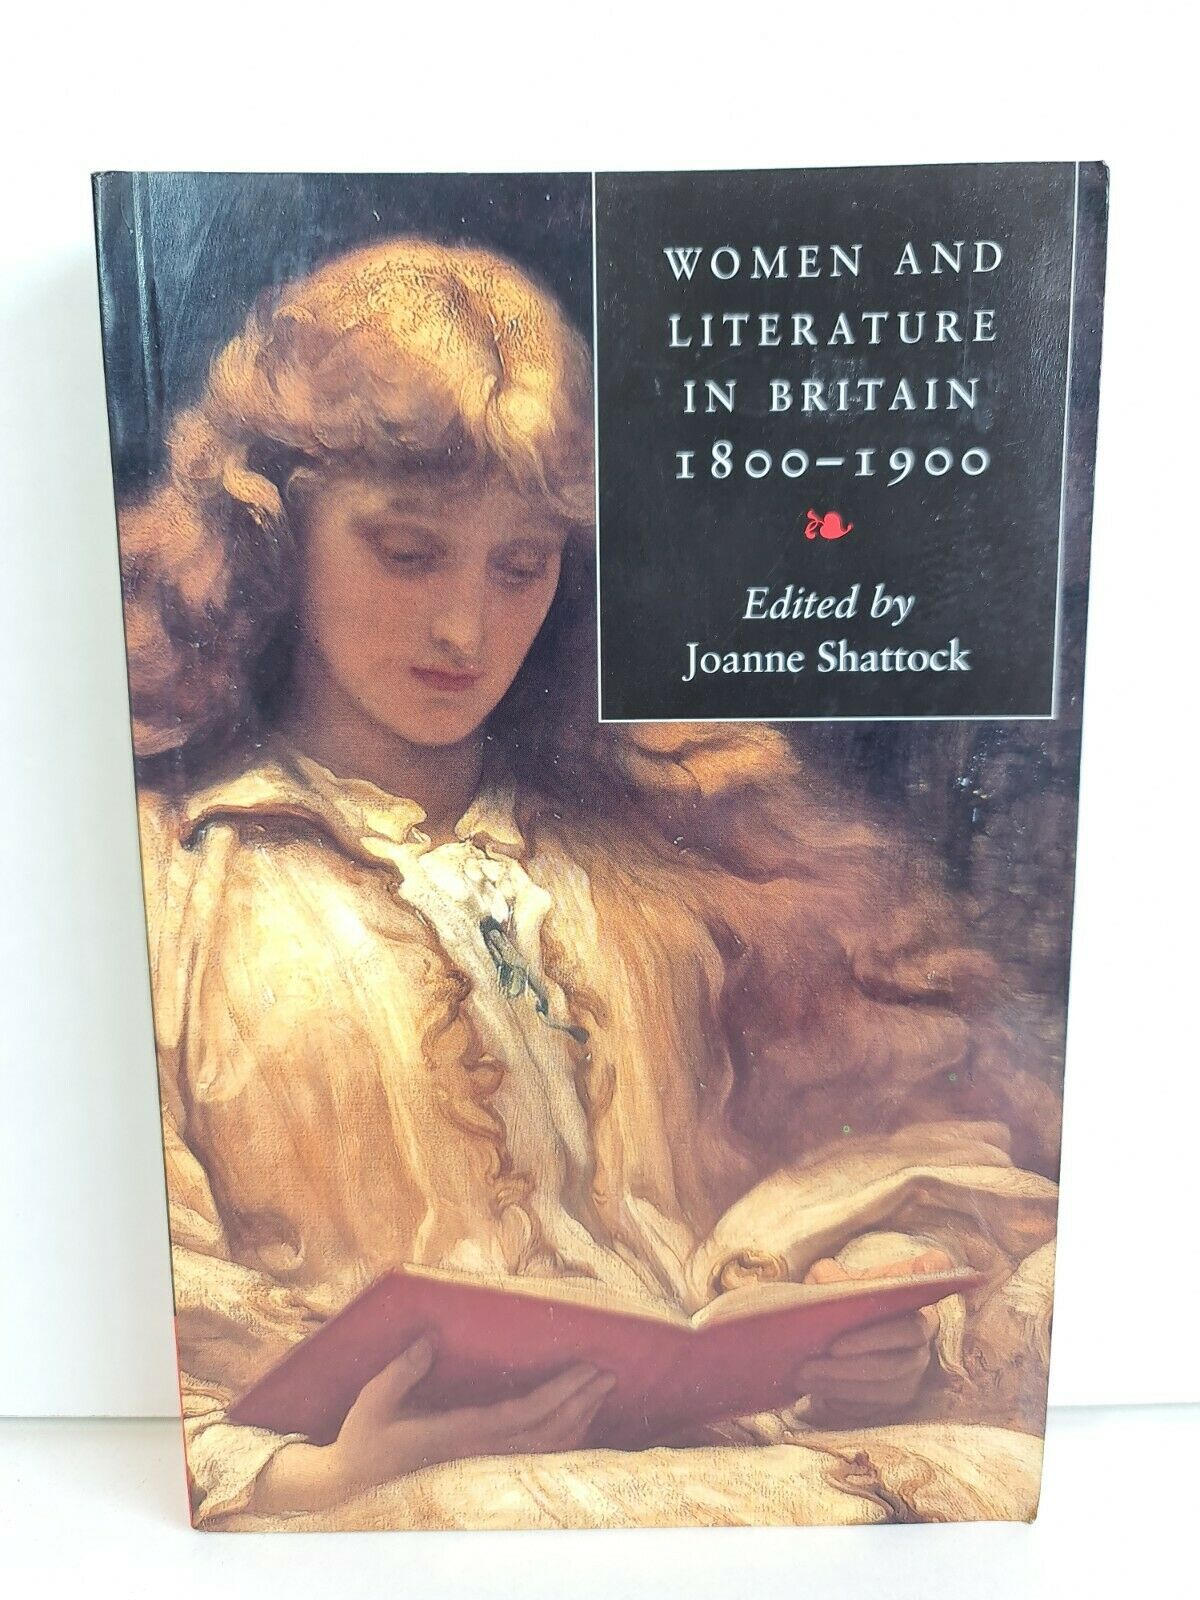 Women and Literature in Britain 1800-1900 by Joanne Shattock